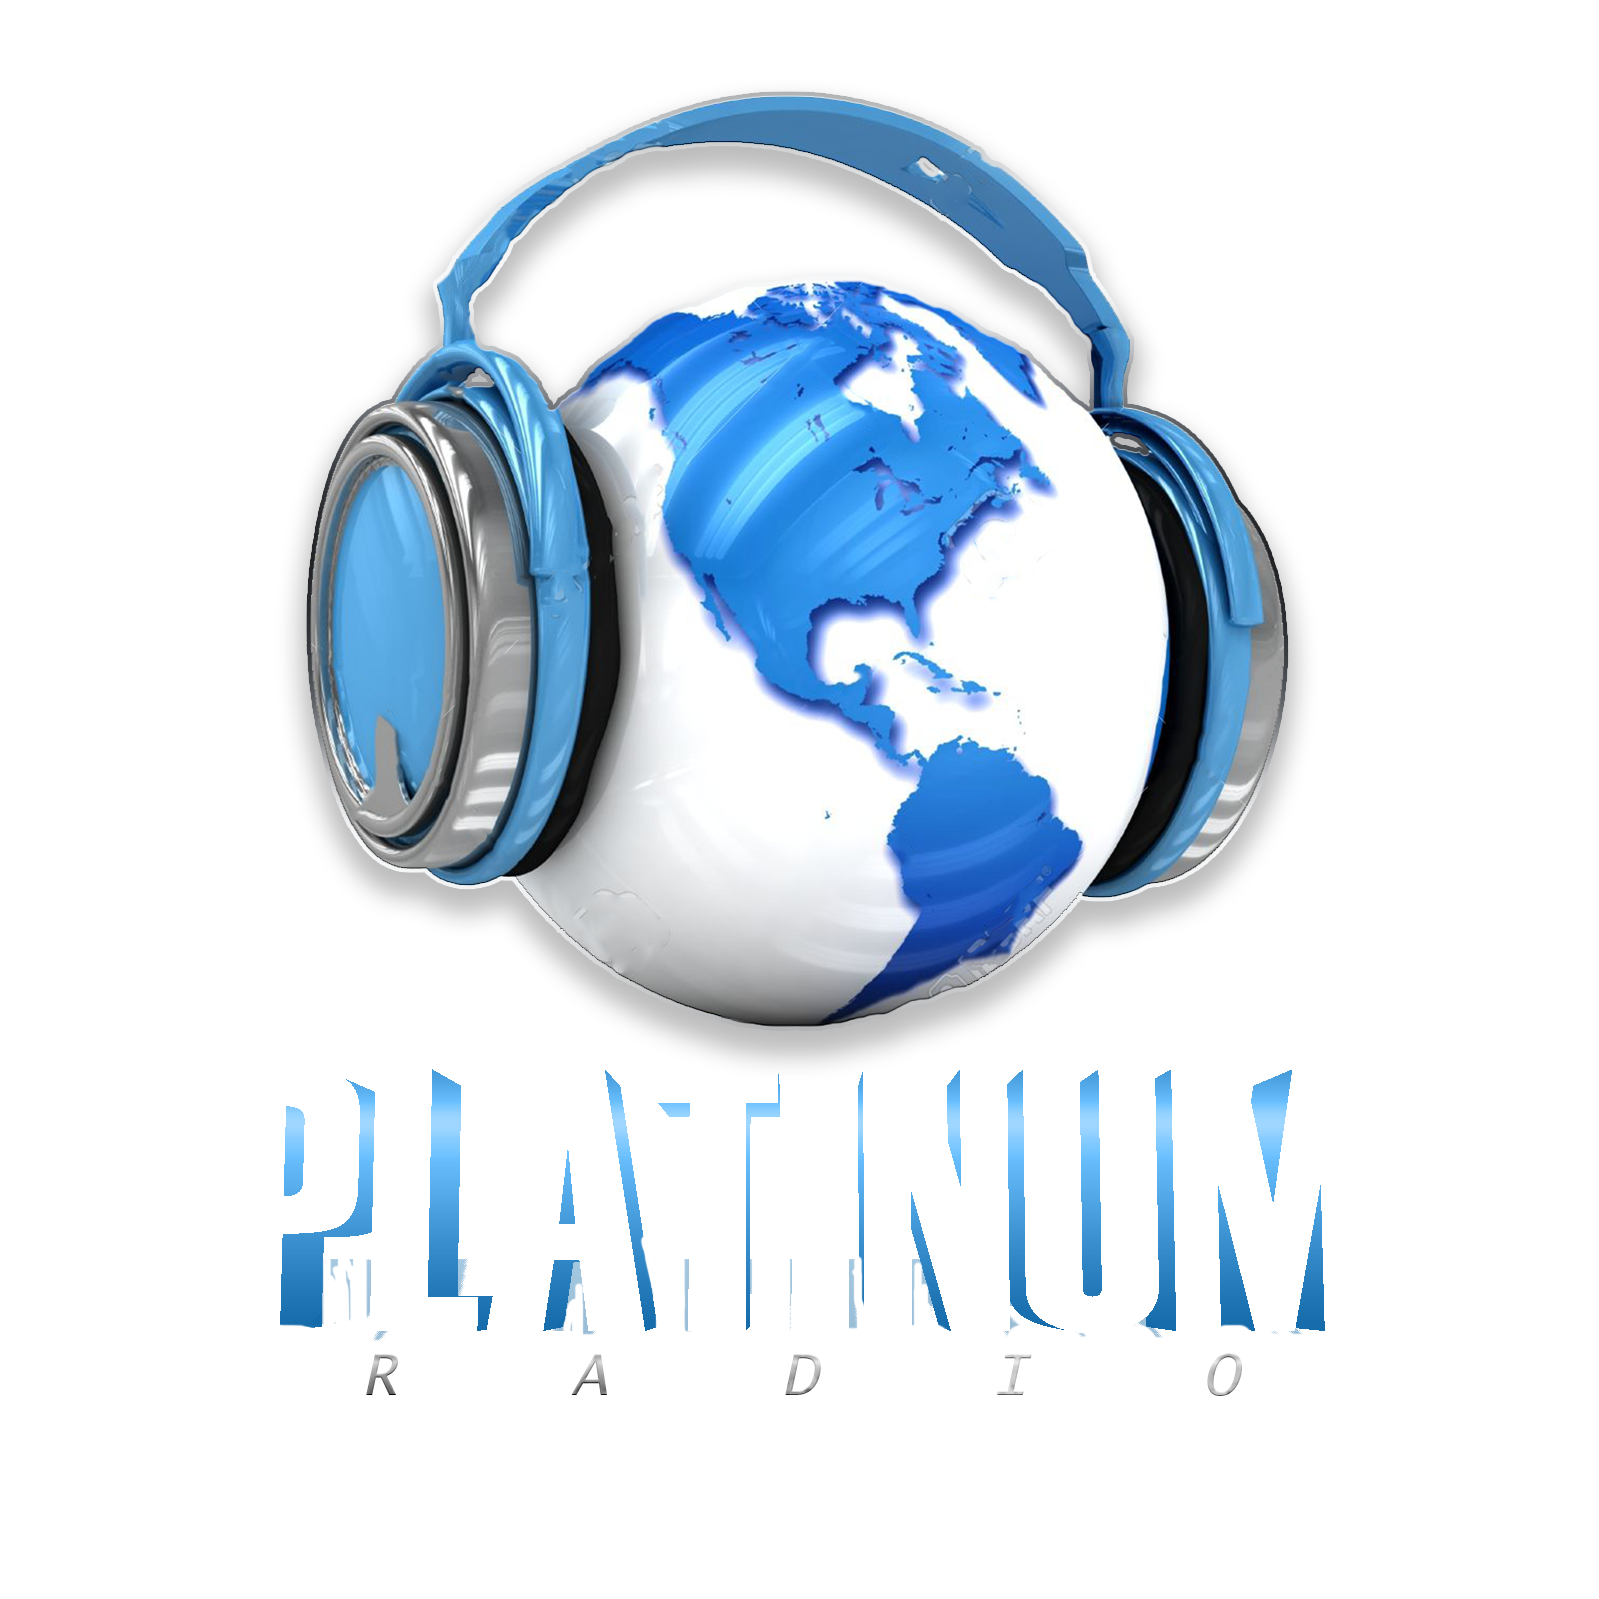 Art for Were Live 24 hours a day  by @platinumradioonline